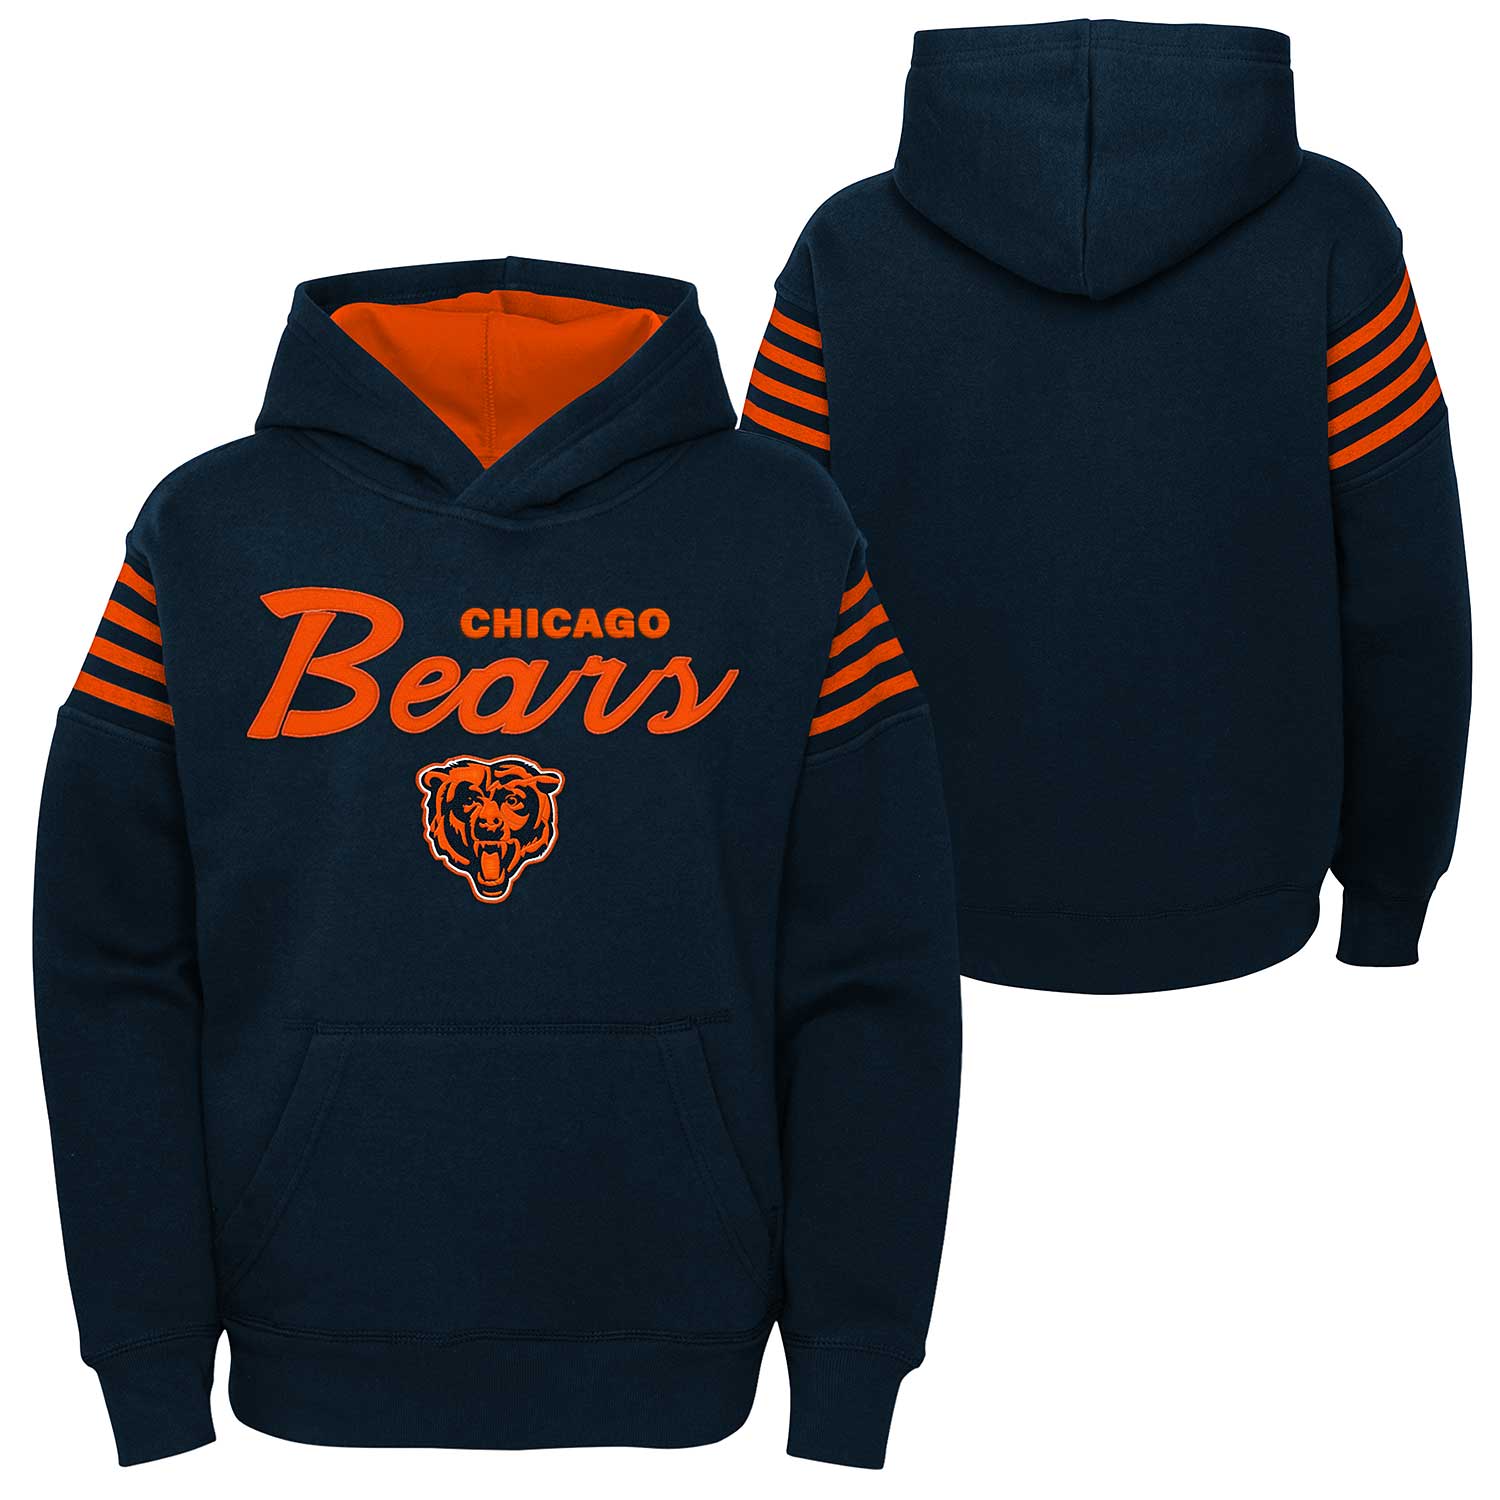 Outerstuff Chicago Bears Youth The Champ Is Here Hoodie Medium = 10-12